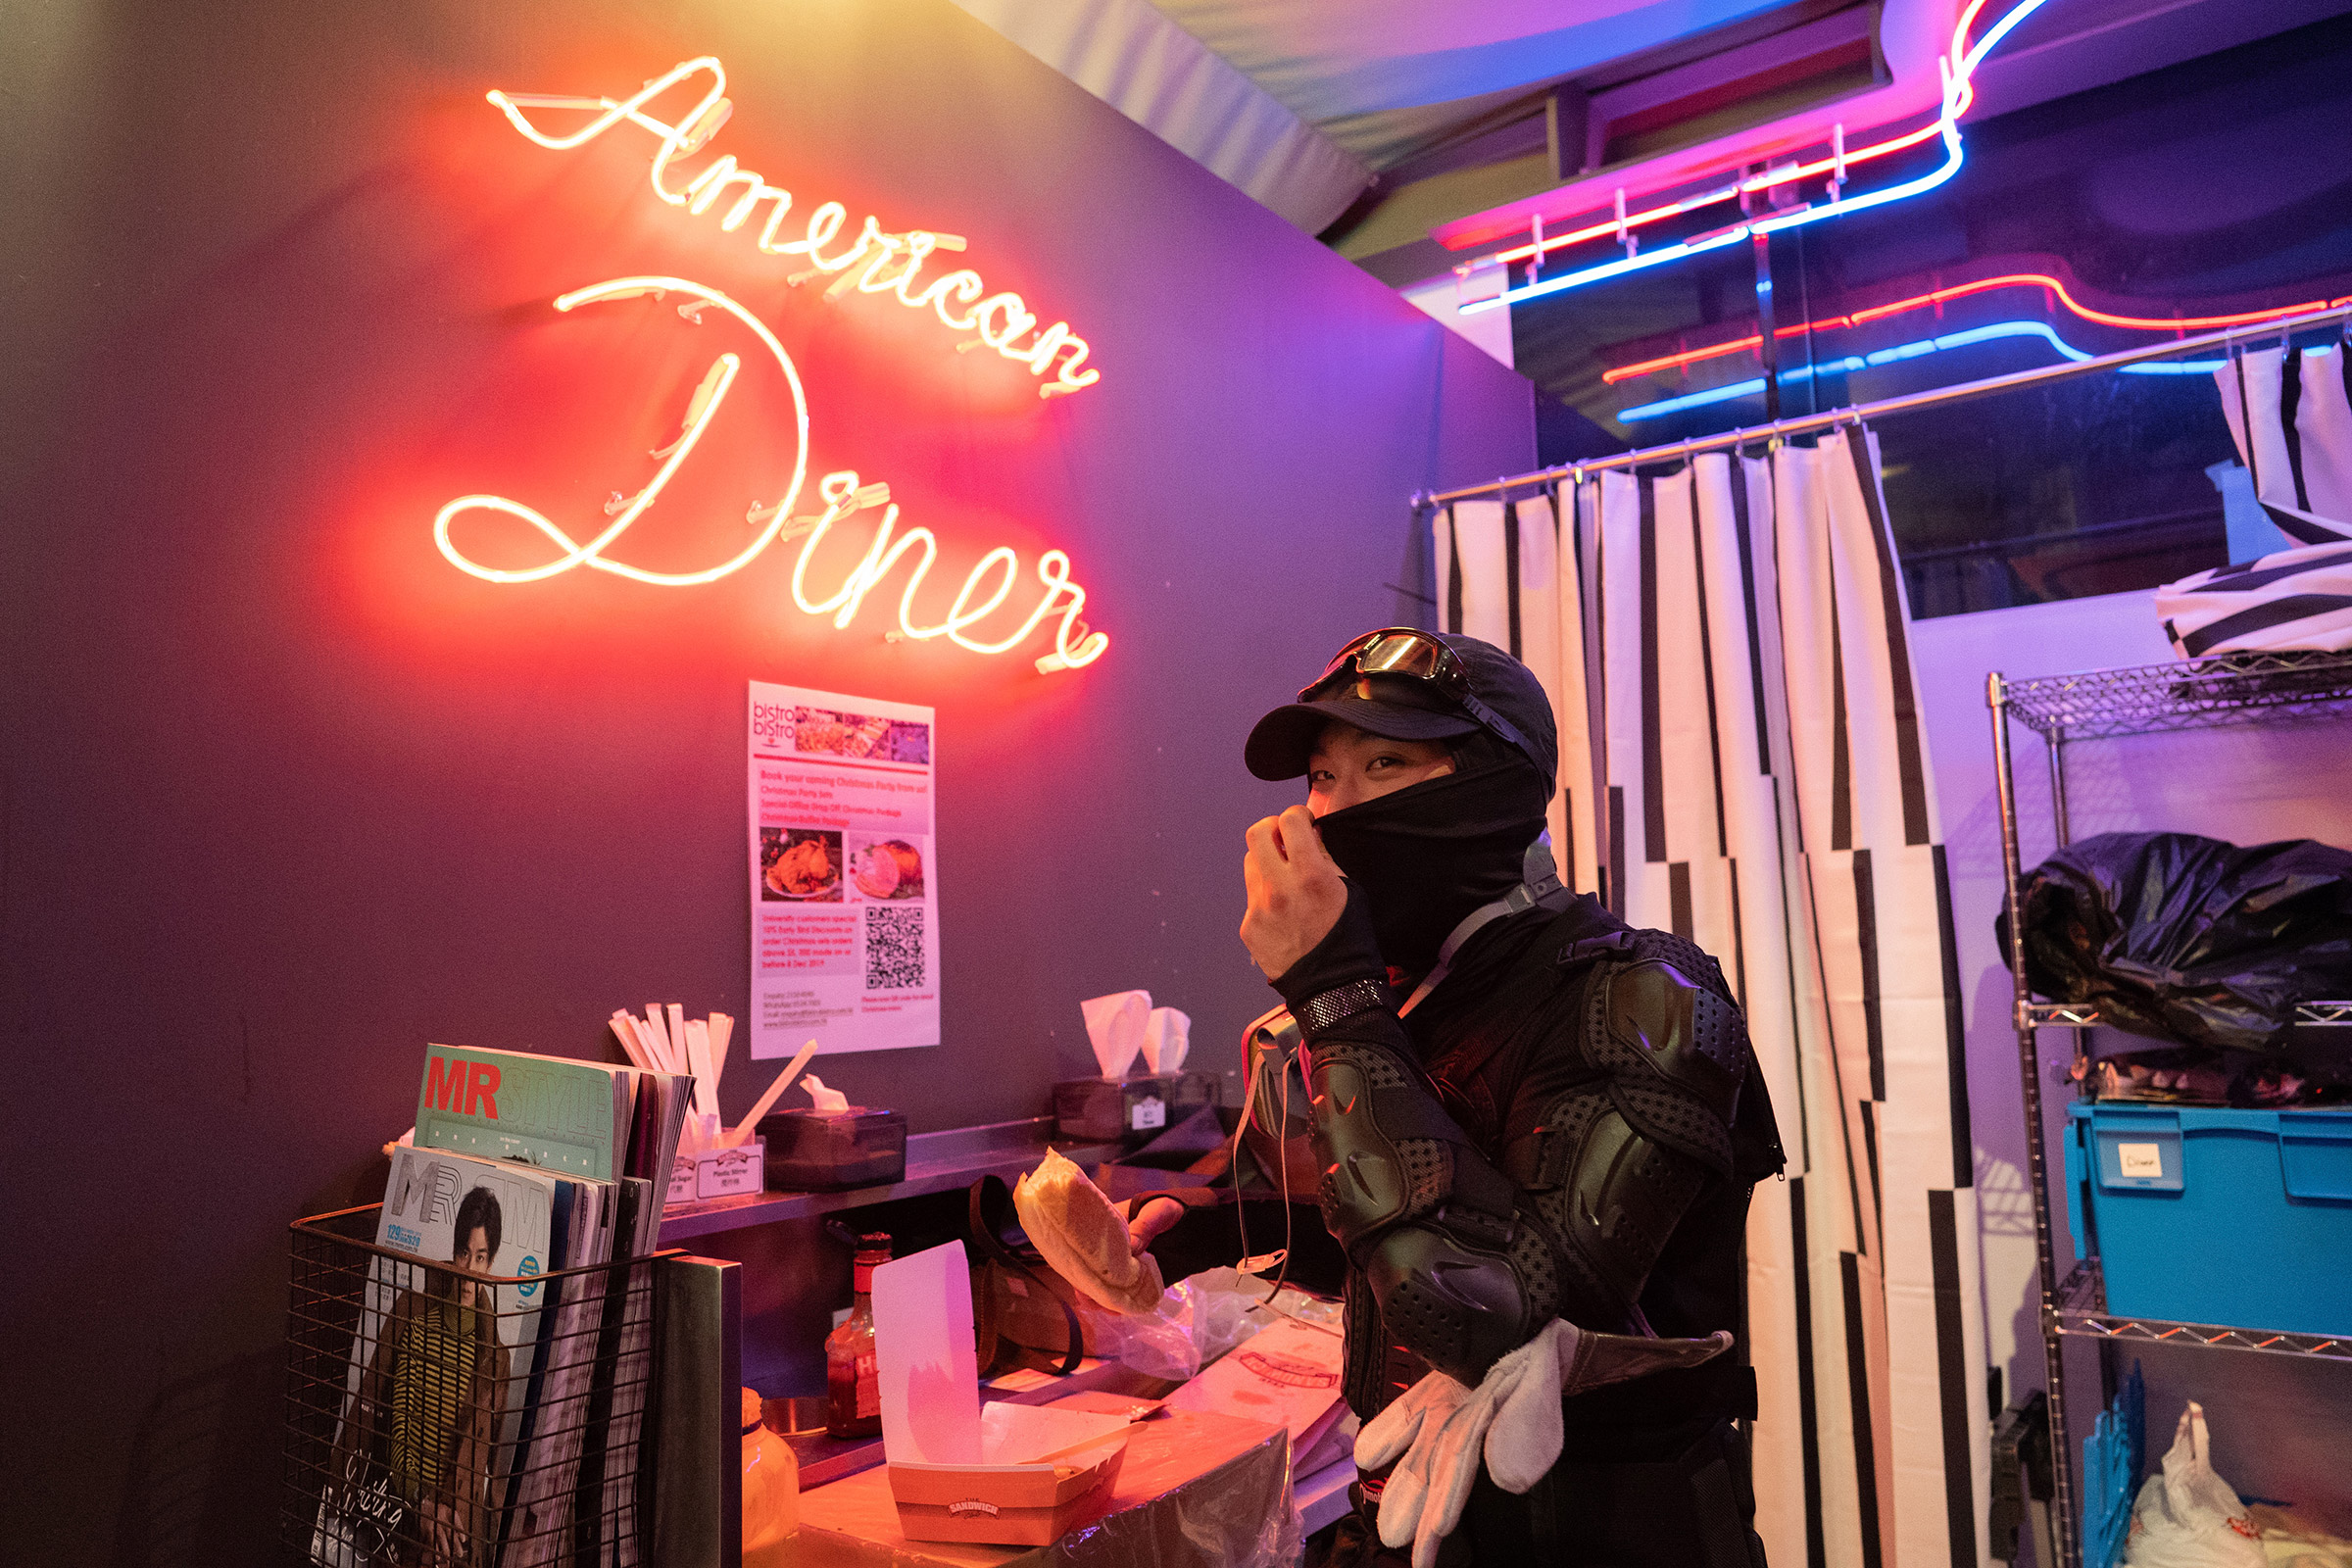 A frontline protestor eats a late-night hot dog at the "American Diner" on the Polytechnic University campus, Nov. 15, 2019.